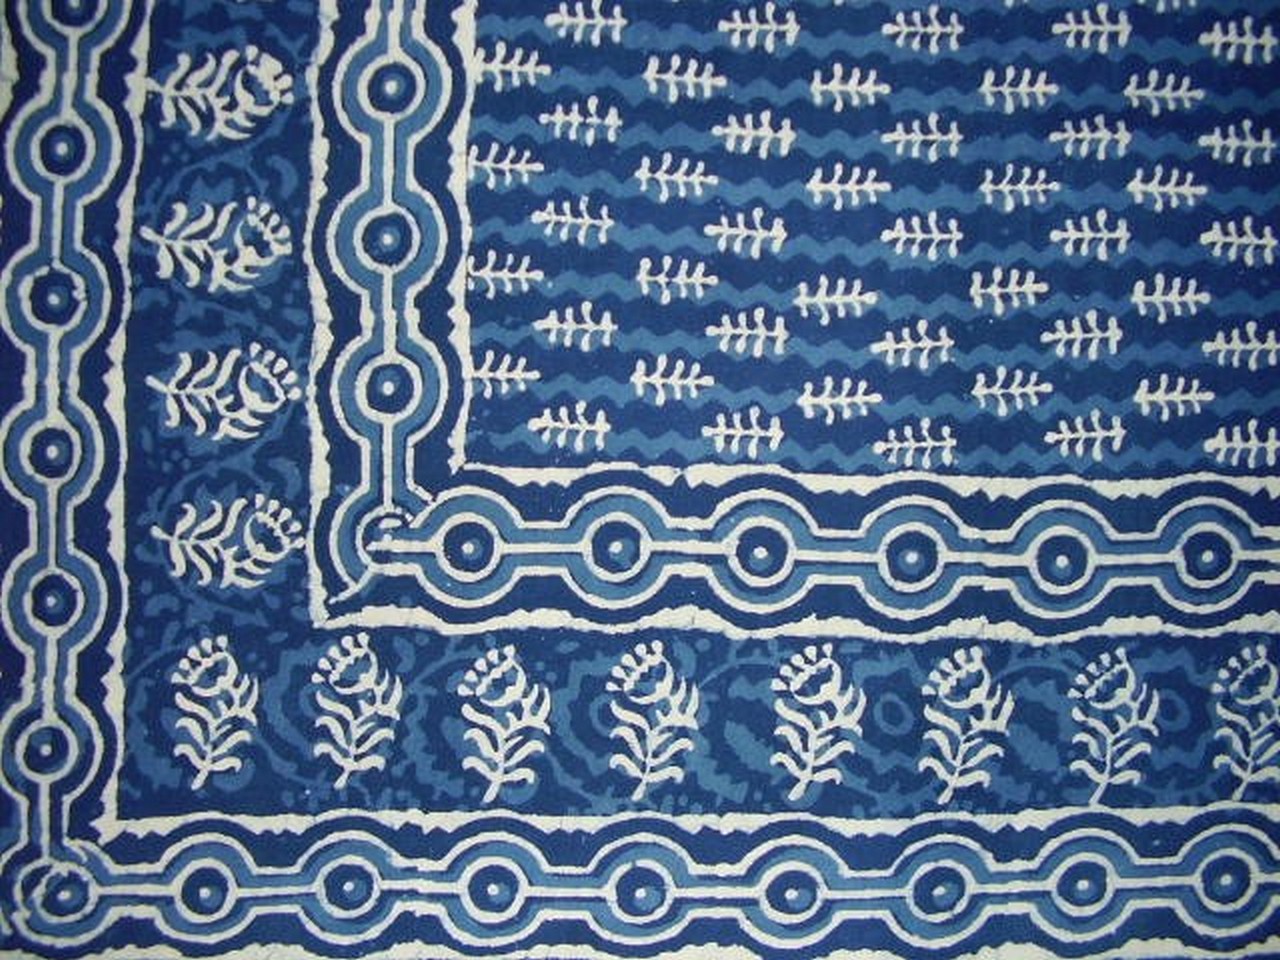 Homestead Dabu Indian Tapestry Cotton Bedspread 108" x 88" Full-Queen Blue